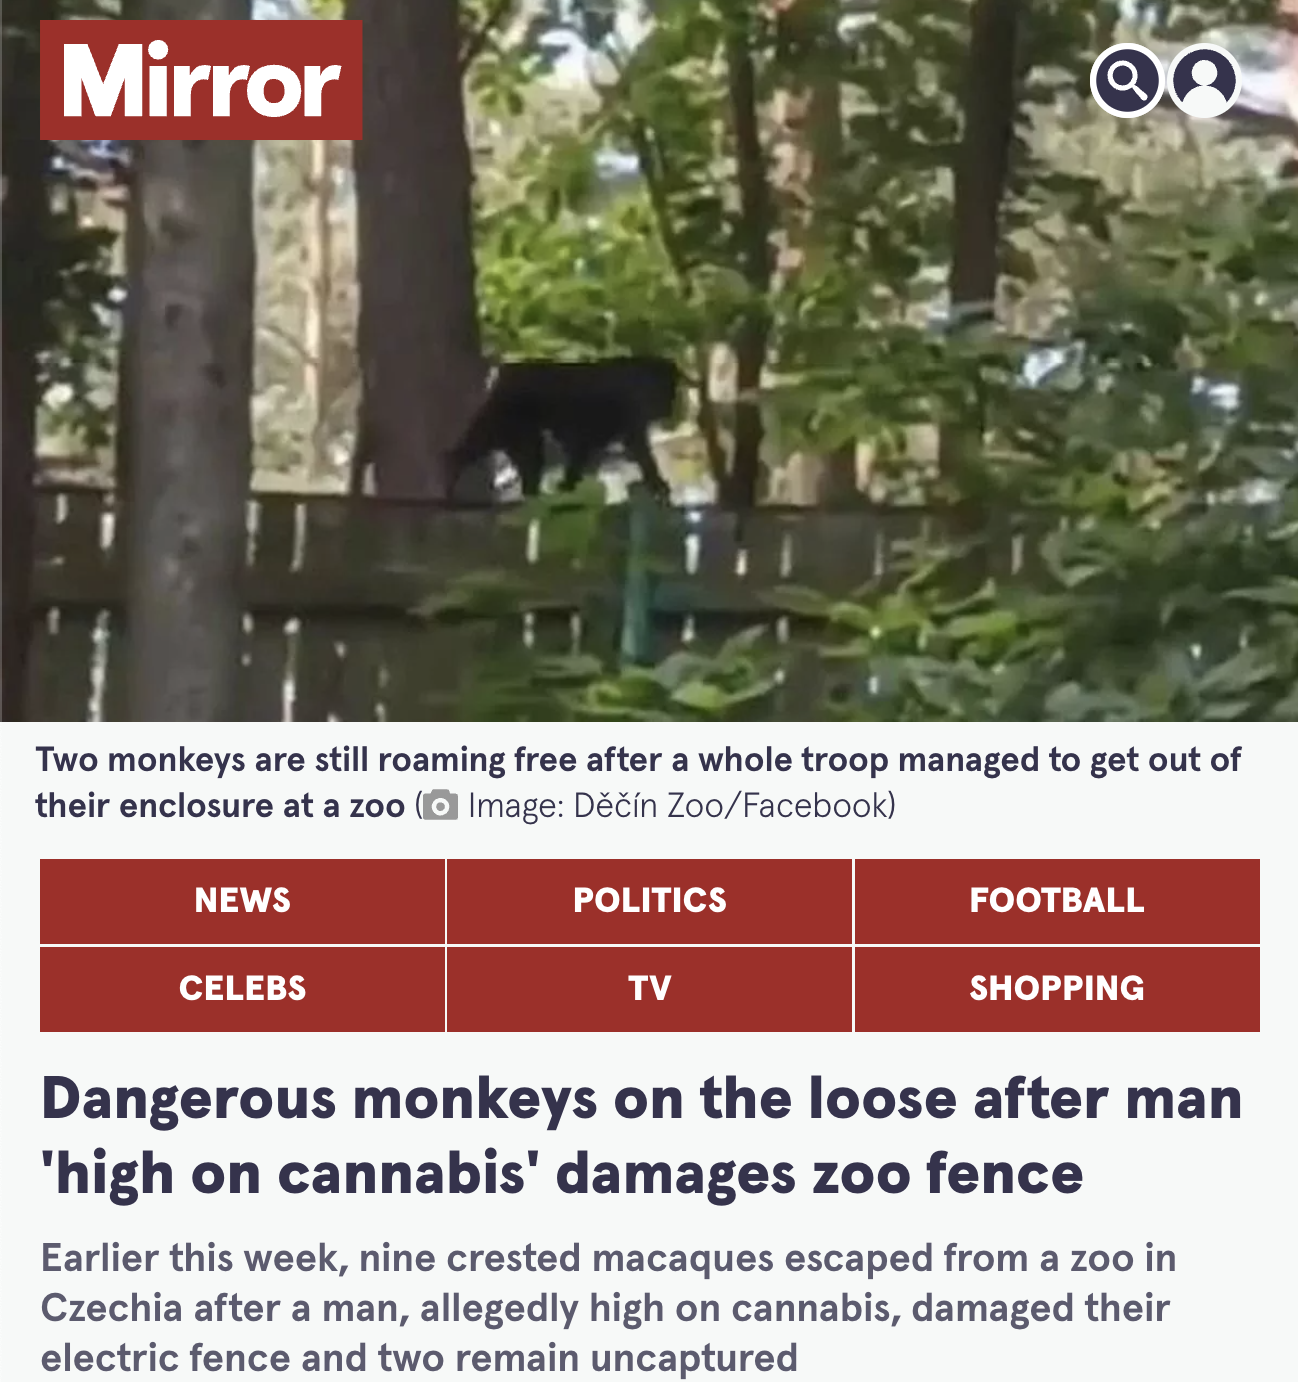 black cat - Mirror Two monkeys are still roaming free after a whole troop managed to get out of their enclosure at a zoo Image Dn ZooFacebook News Celebs Politics Tv Football Shopping Dangerous monkeys on the loose after man 'high on cannabis' damages zoo